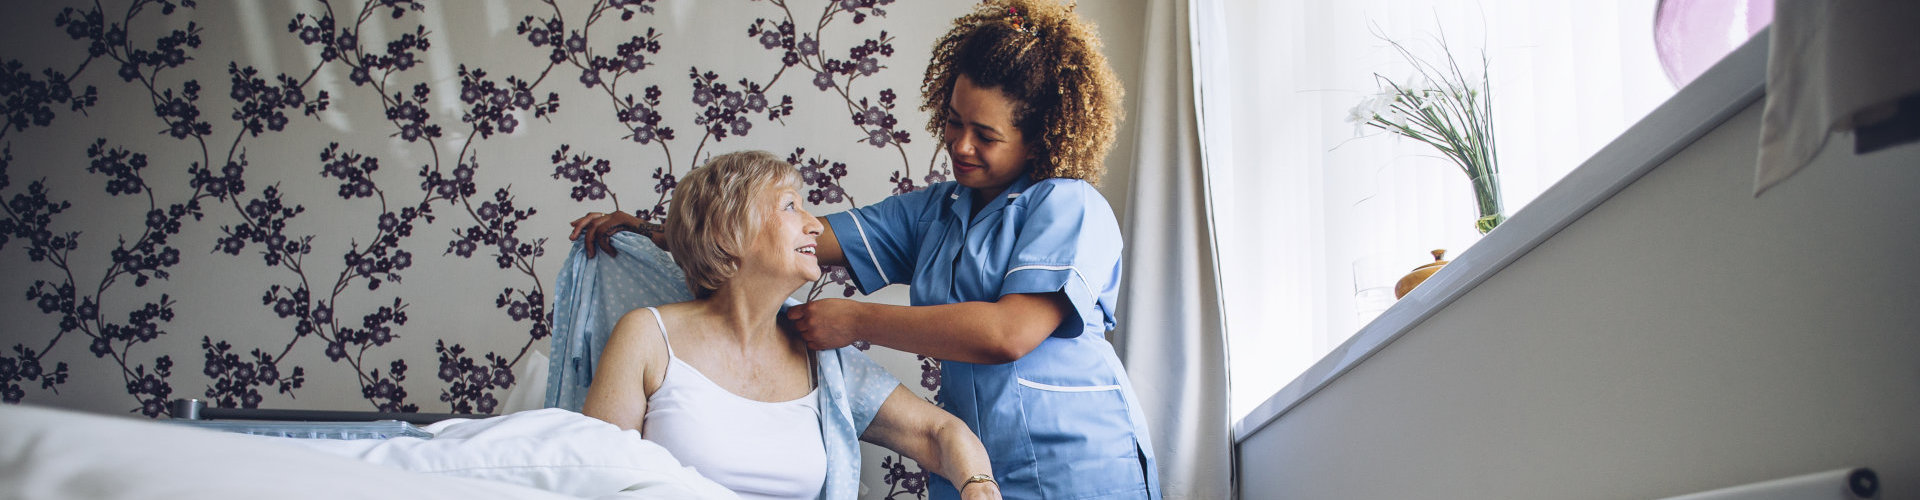 Caregiver helping a senior woman get dressed in her bedroom